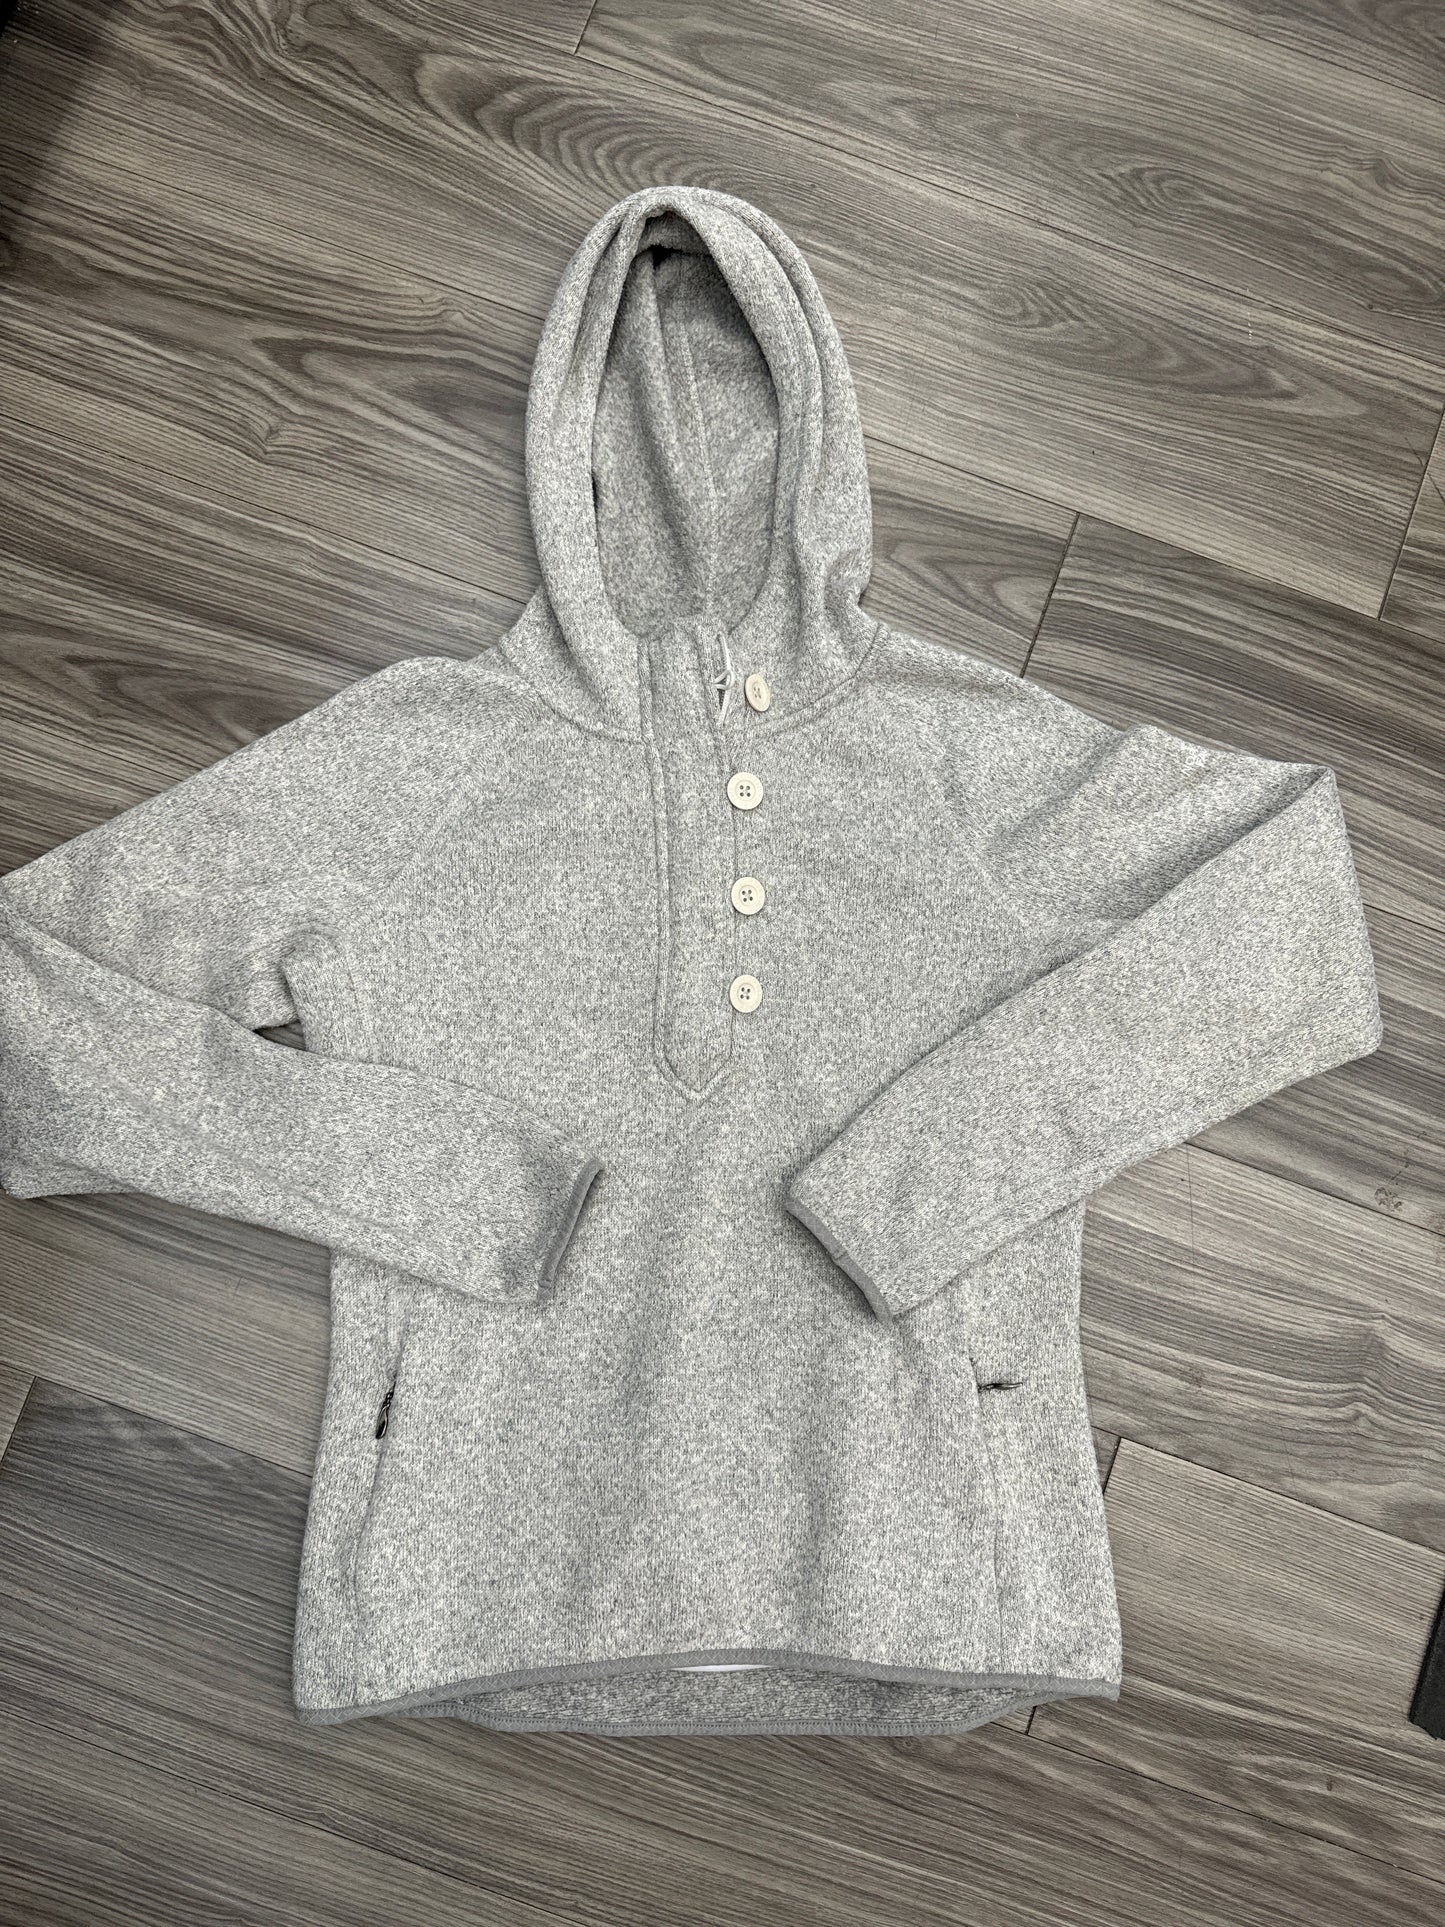 Sweatshirt Hoodie By The North Face  Size: L